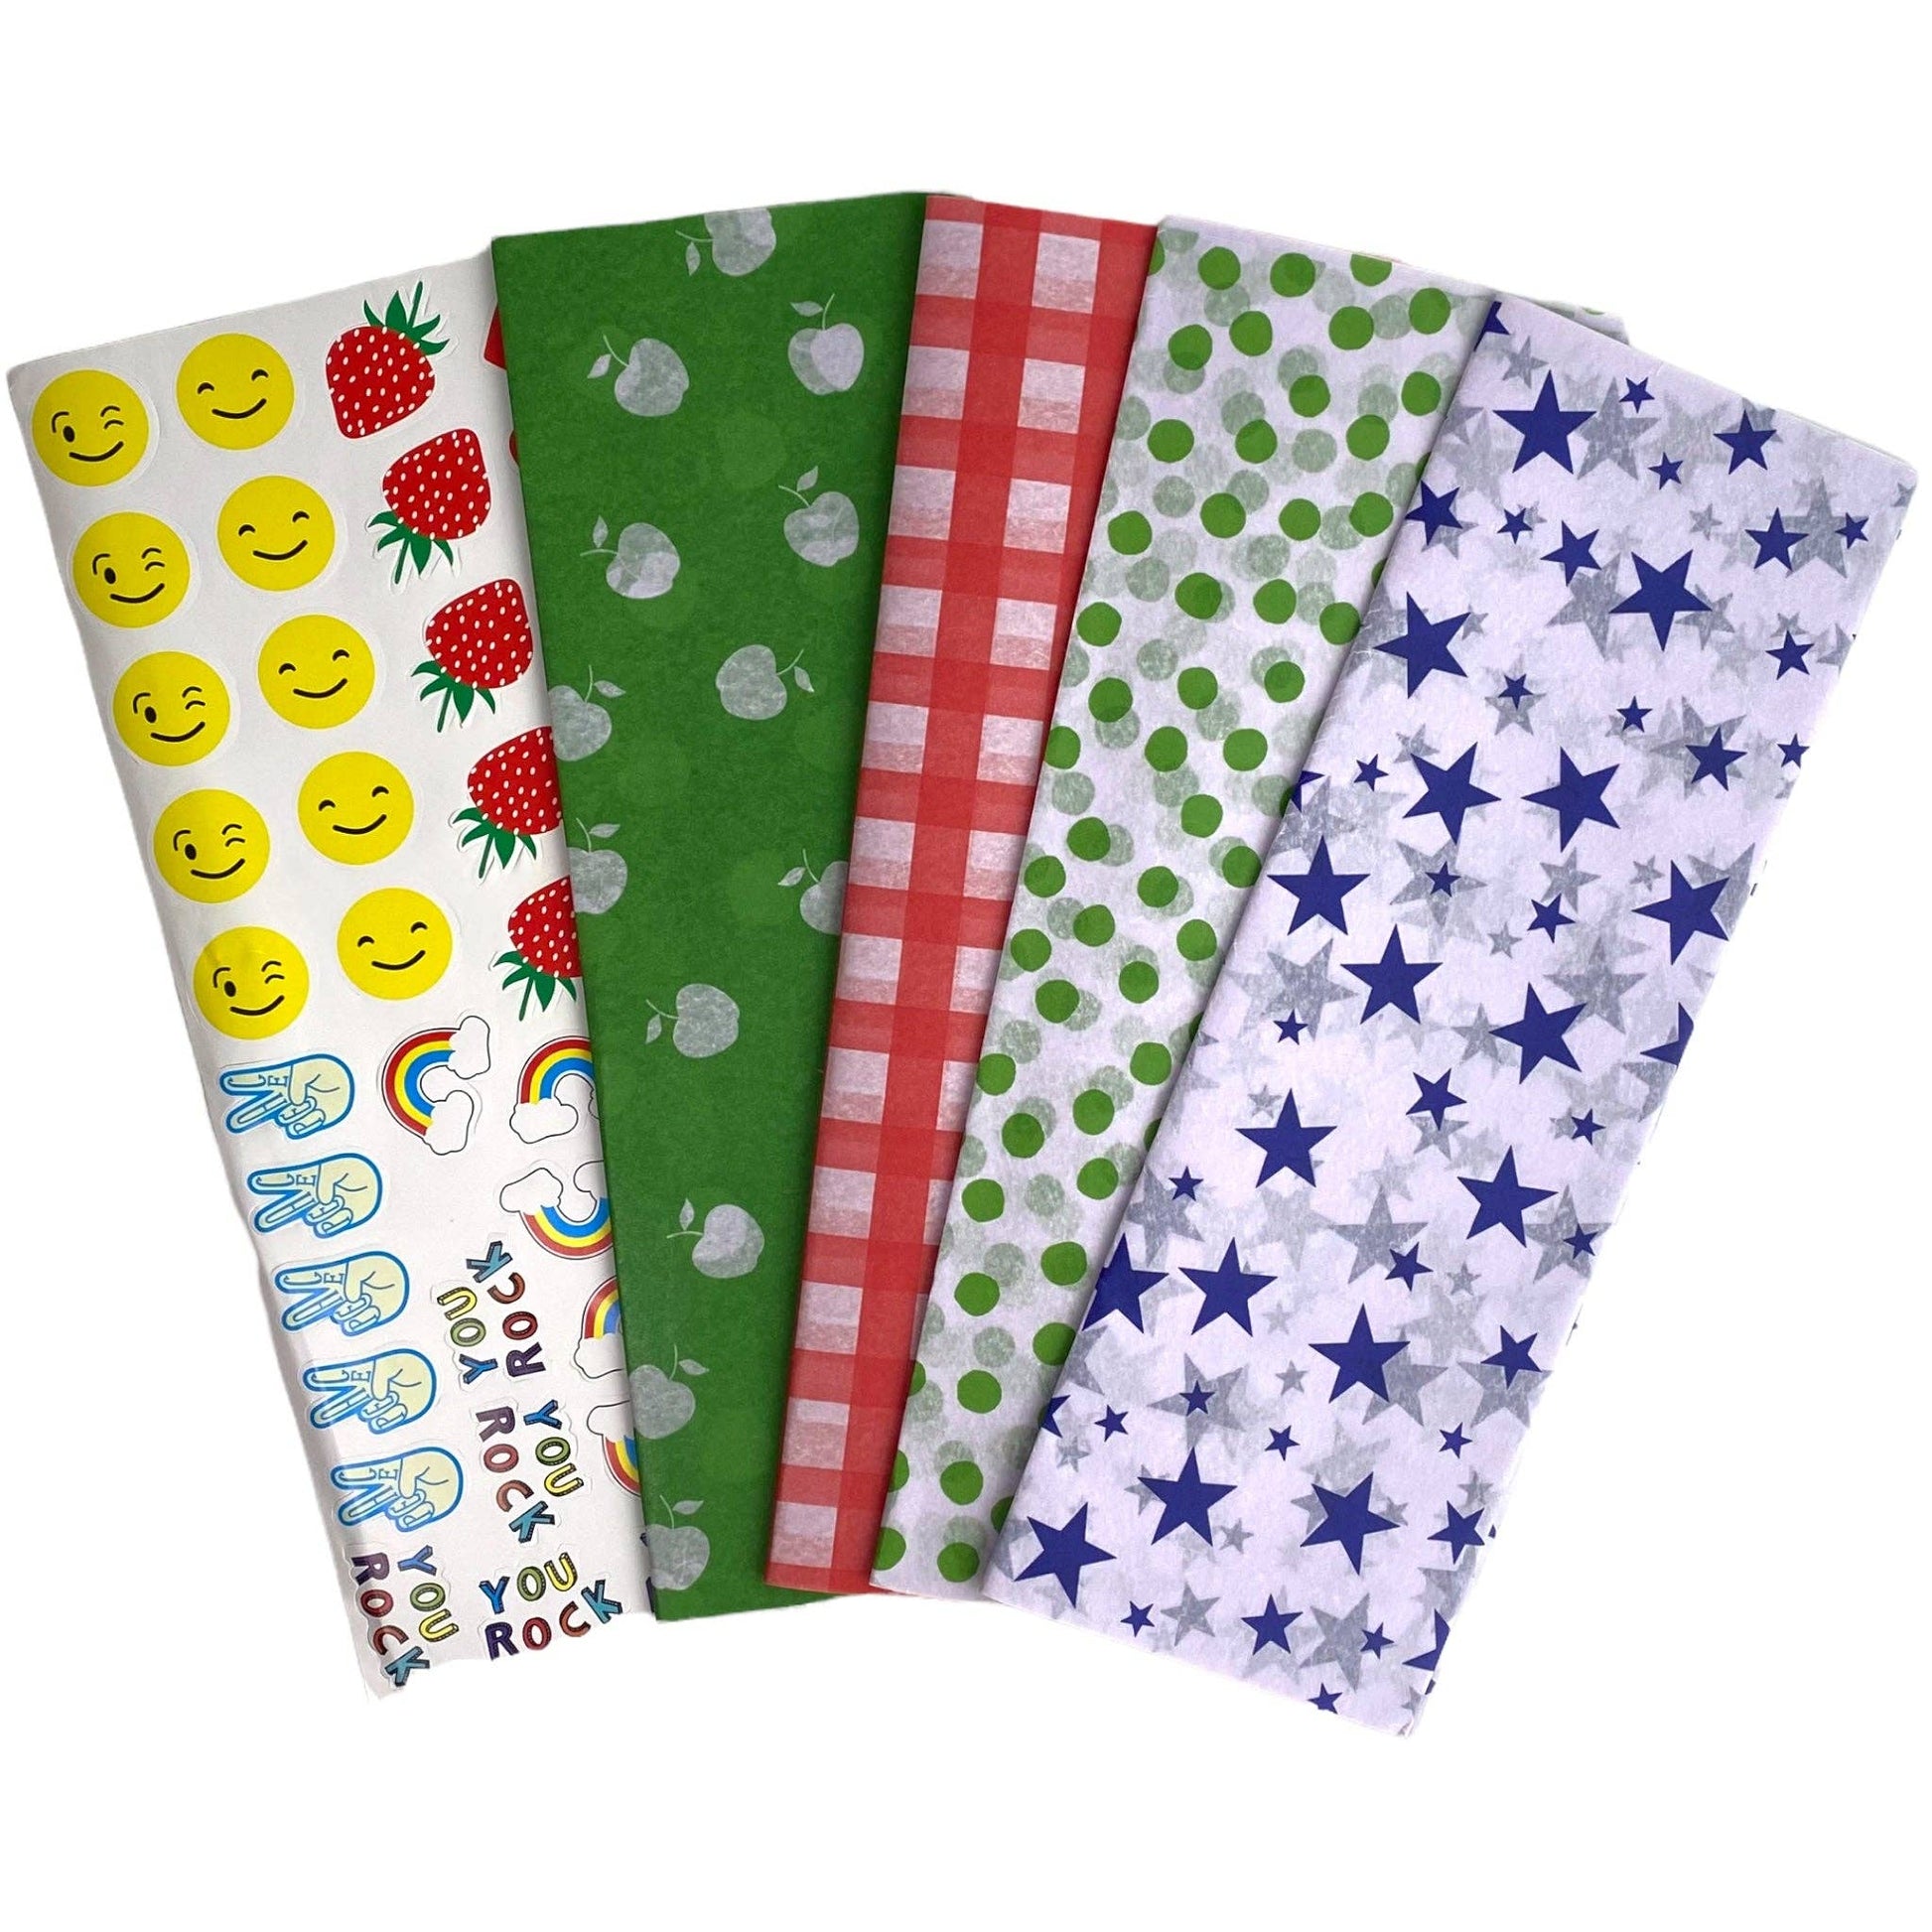 Fun prints sandwich wrapping papers and stickers.  green with white apples, red and white checkers, green dots, blue stars